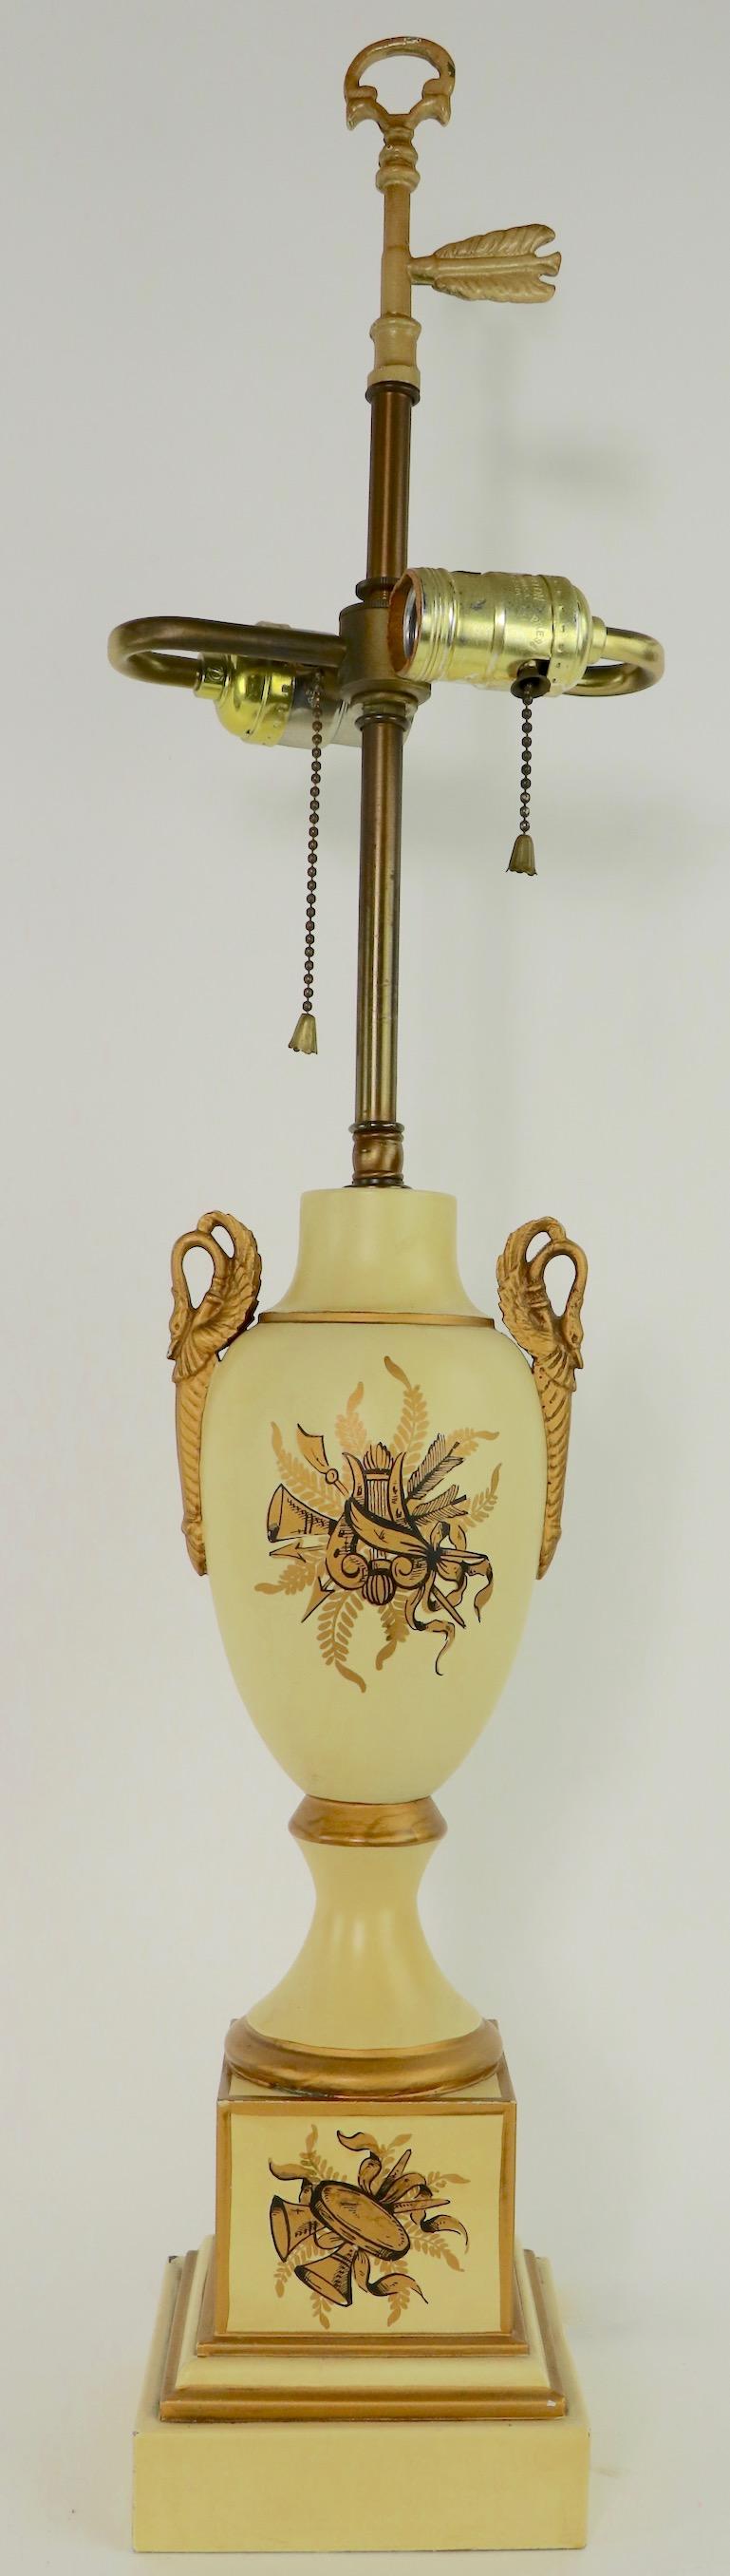 Classical urn form tole decorated table lamps, having bases made in France, for the Tyndale Lamp Company. Each lamp has bird form handles, on pale yellow bodies, with stepped plinth bases. In the 18th century French Empire style, circa 1960s-1970s.